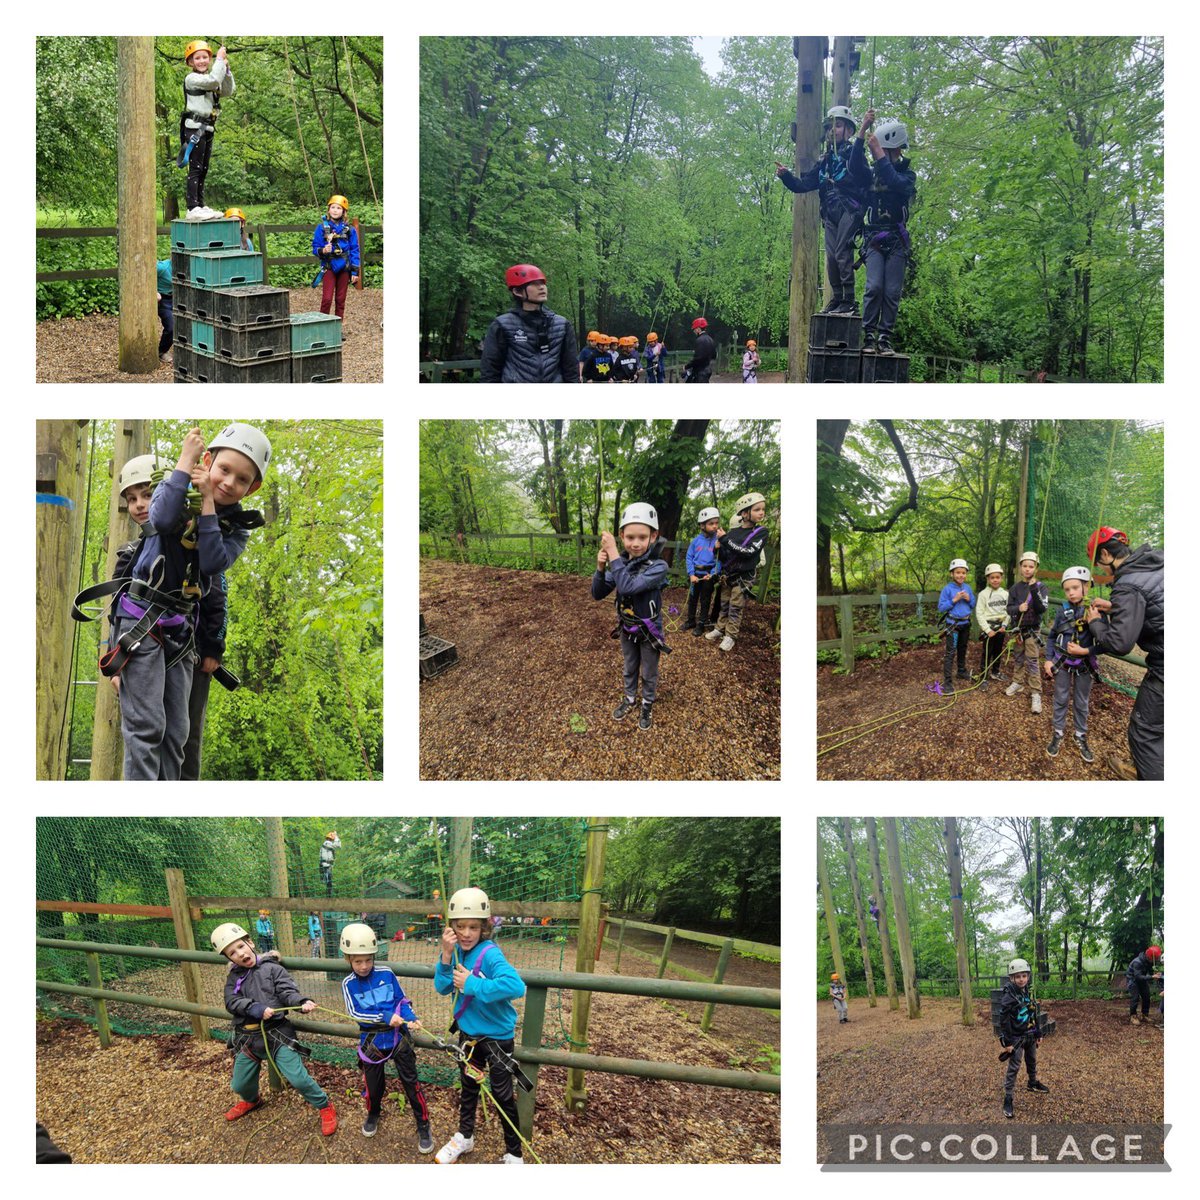 Archery and crate stacking for Y4 @scoutadventures .